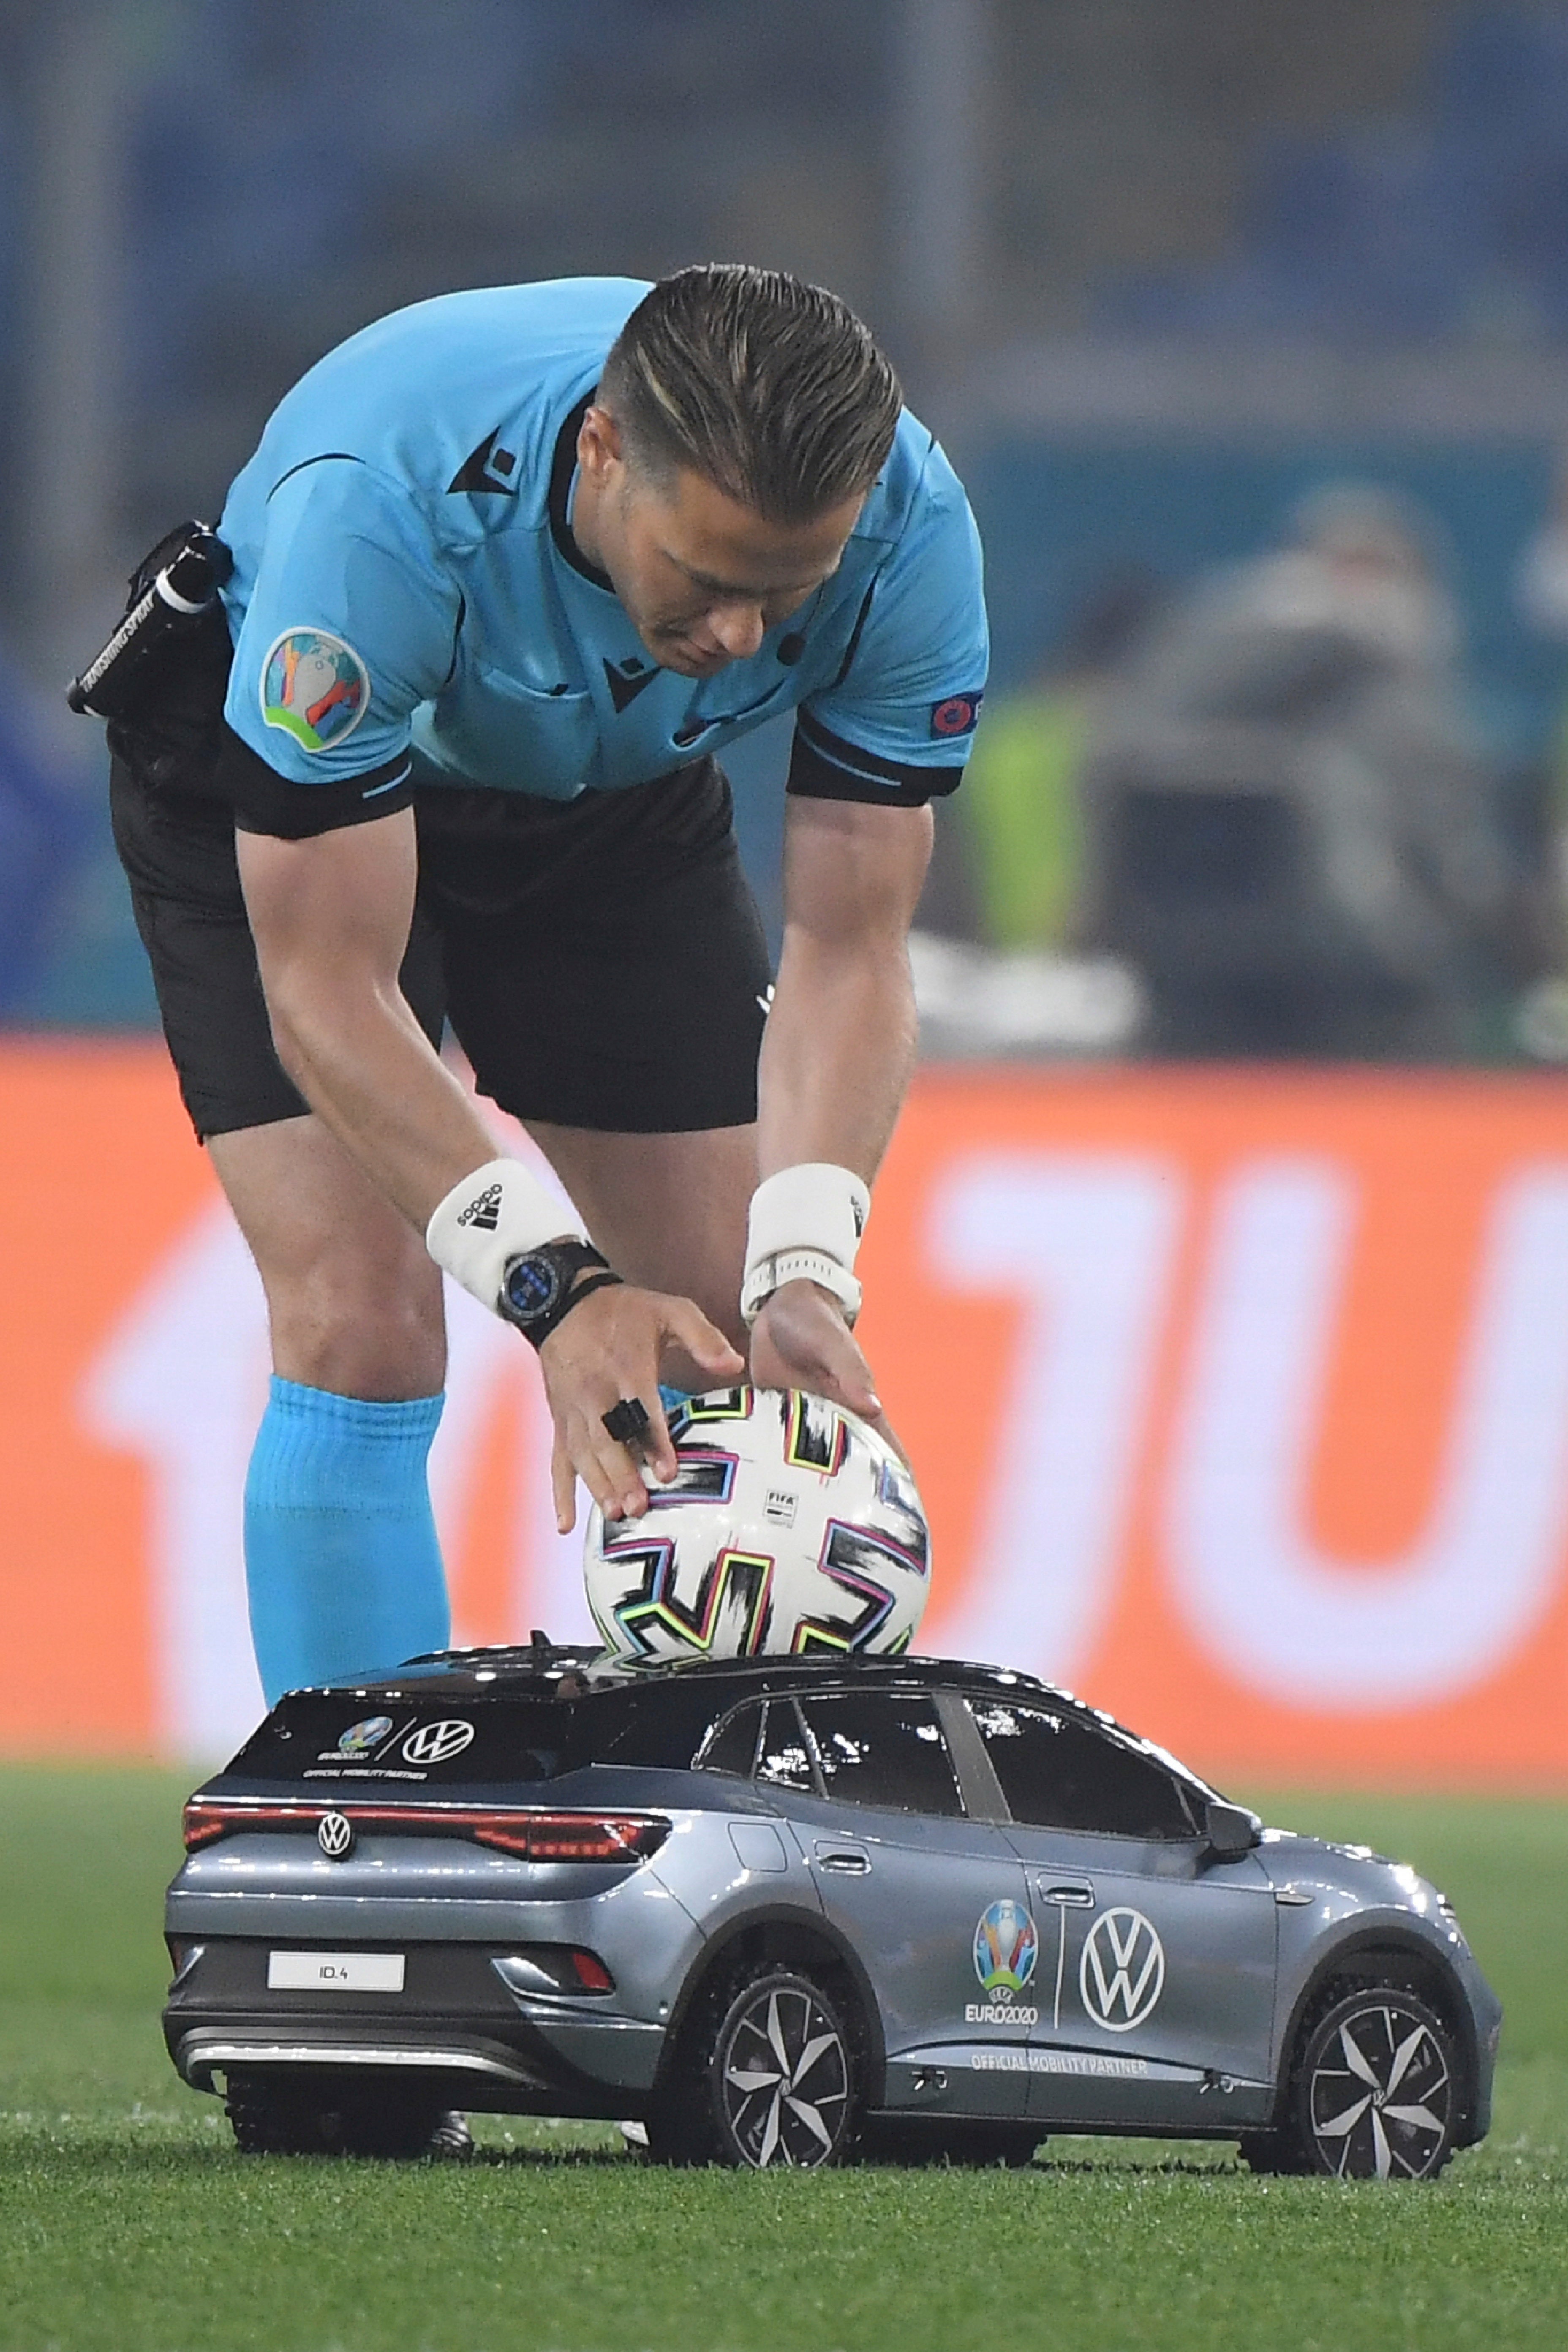 Dutch referee Danny Makkelie picks up the match ball, which was delivered by a remote-controlled car